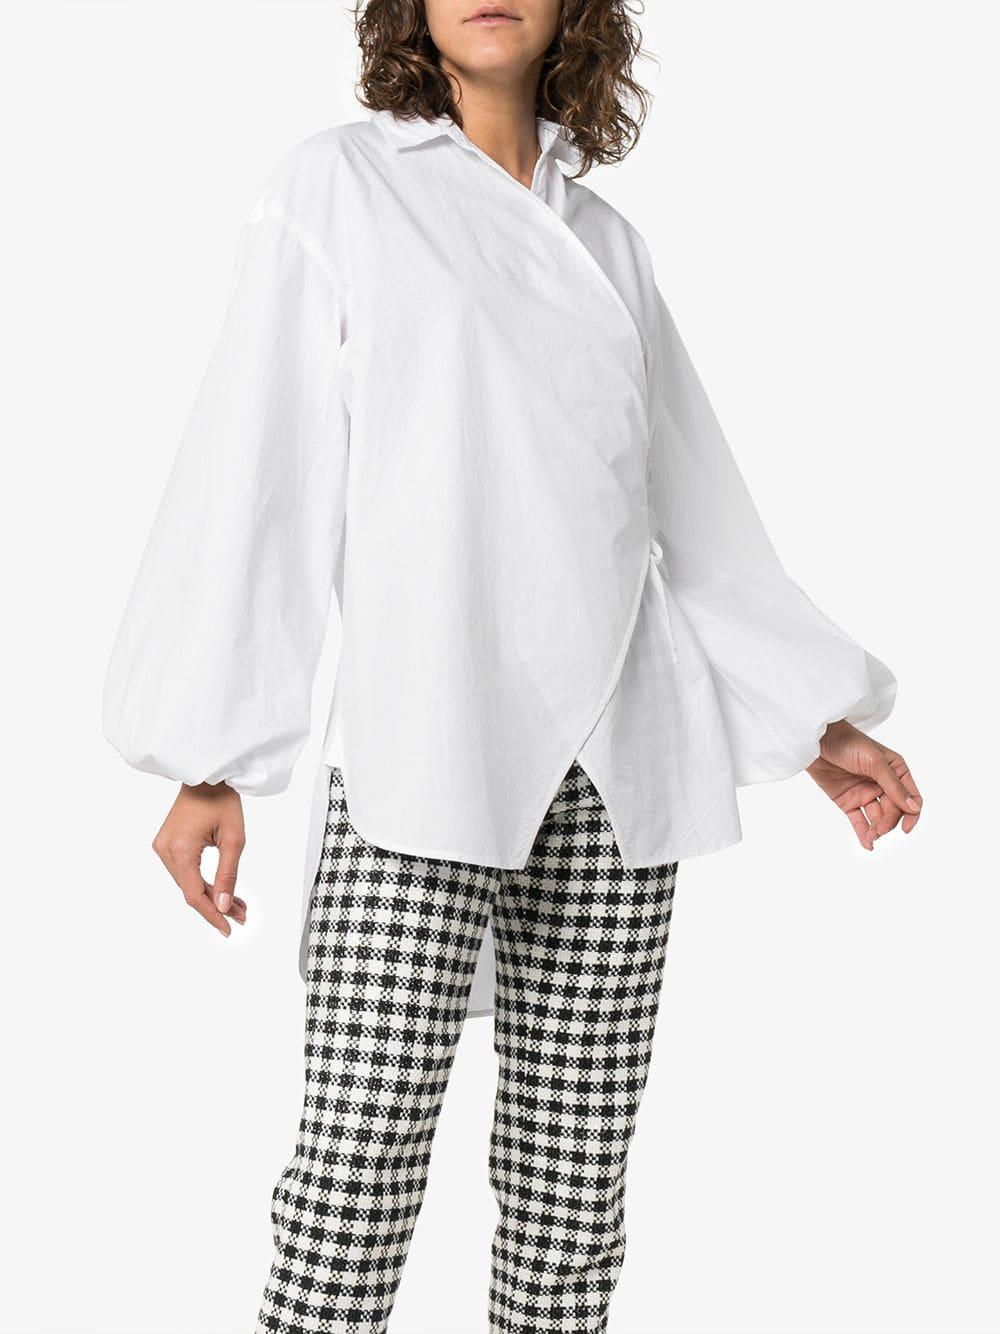 Ganni Olayan Wrap Tie Front Shirt in White | Lyst